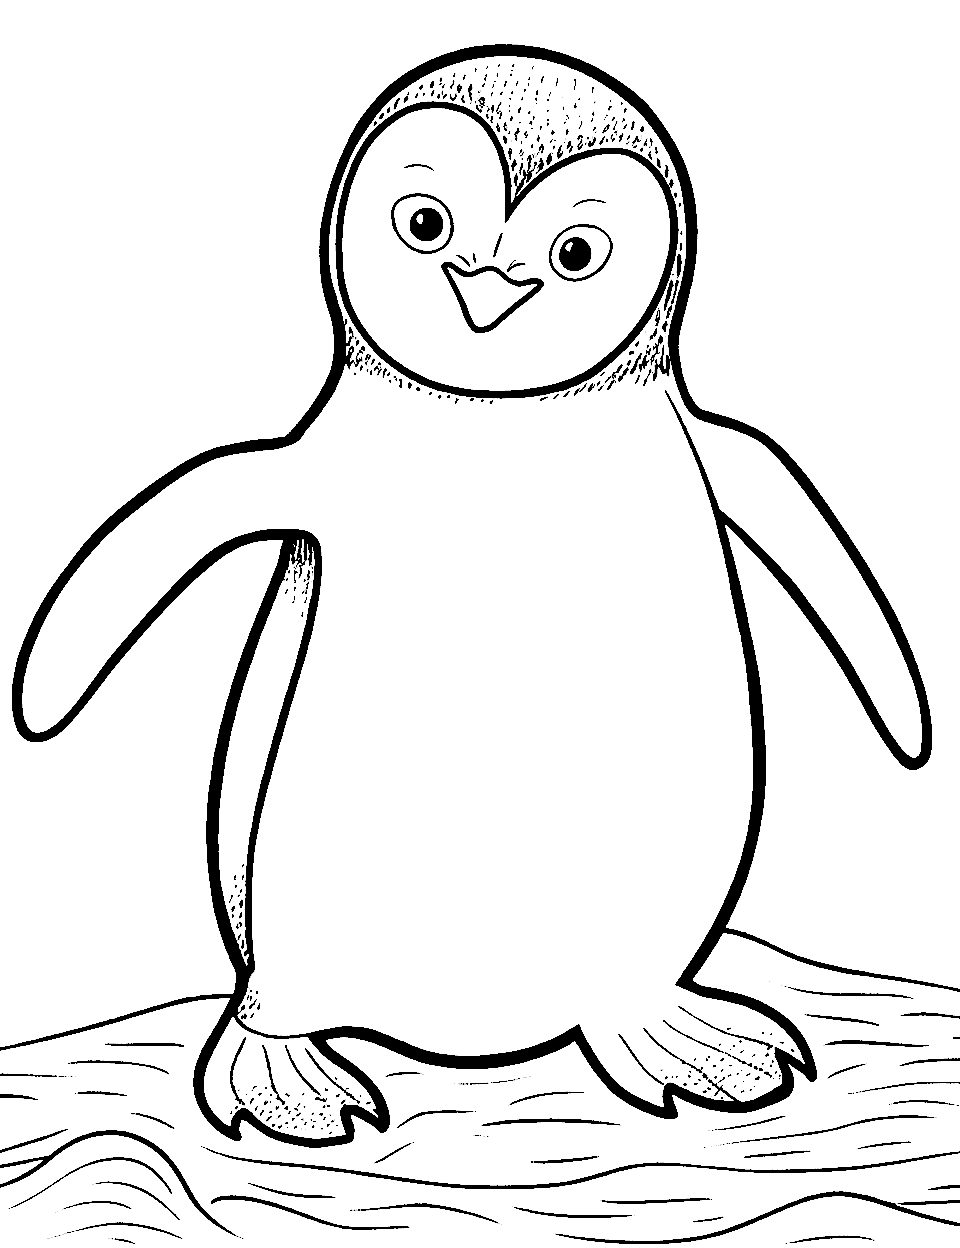 Penguin's Ice Dance Coloring Page - A penguin gracefully dancing on a smooth patch of ice.